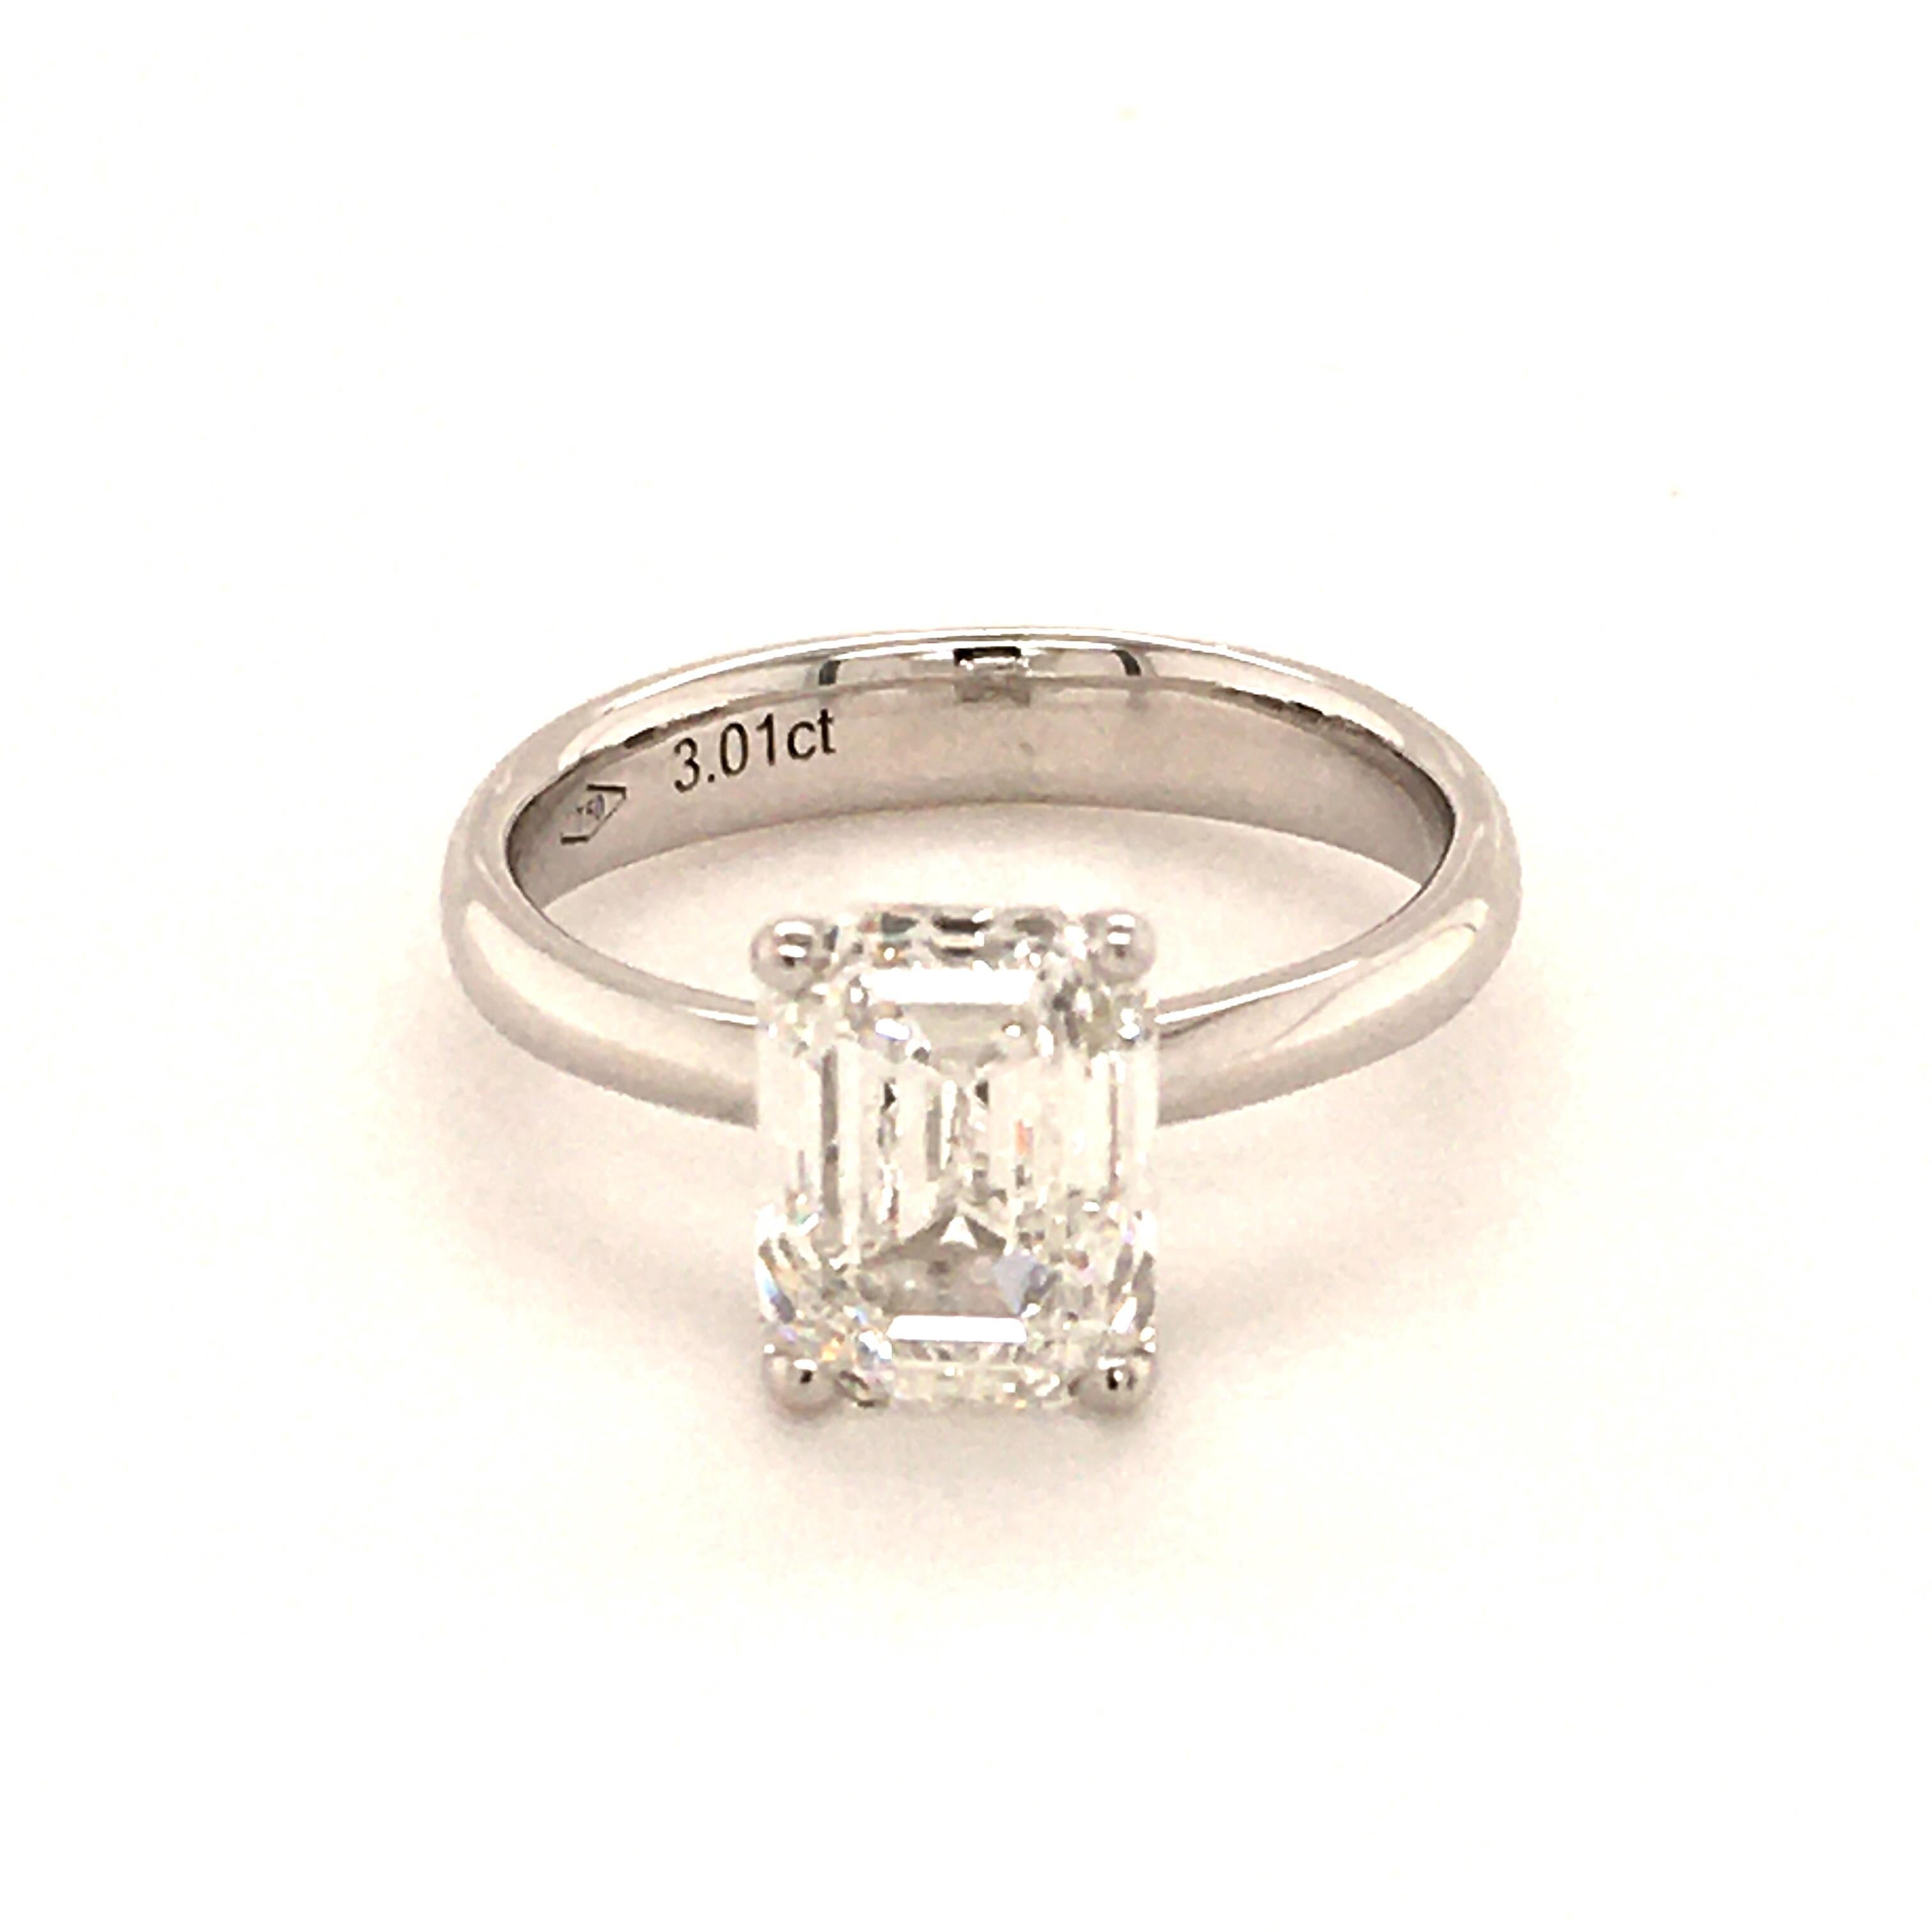 Superb solitaire ring in white gold 750, prong set with 1 emerald cut diamond with following characteristics:

Weight: 3.01 ct
Colour: G
Clarity: vvs2
Fluorescence: medium blue
Polish: excellent
Symmetry: excellent
GIA Report Nr.: 6204890921

Ring